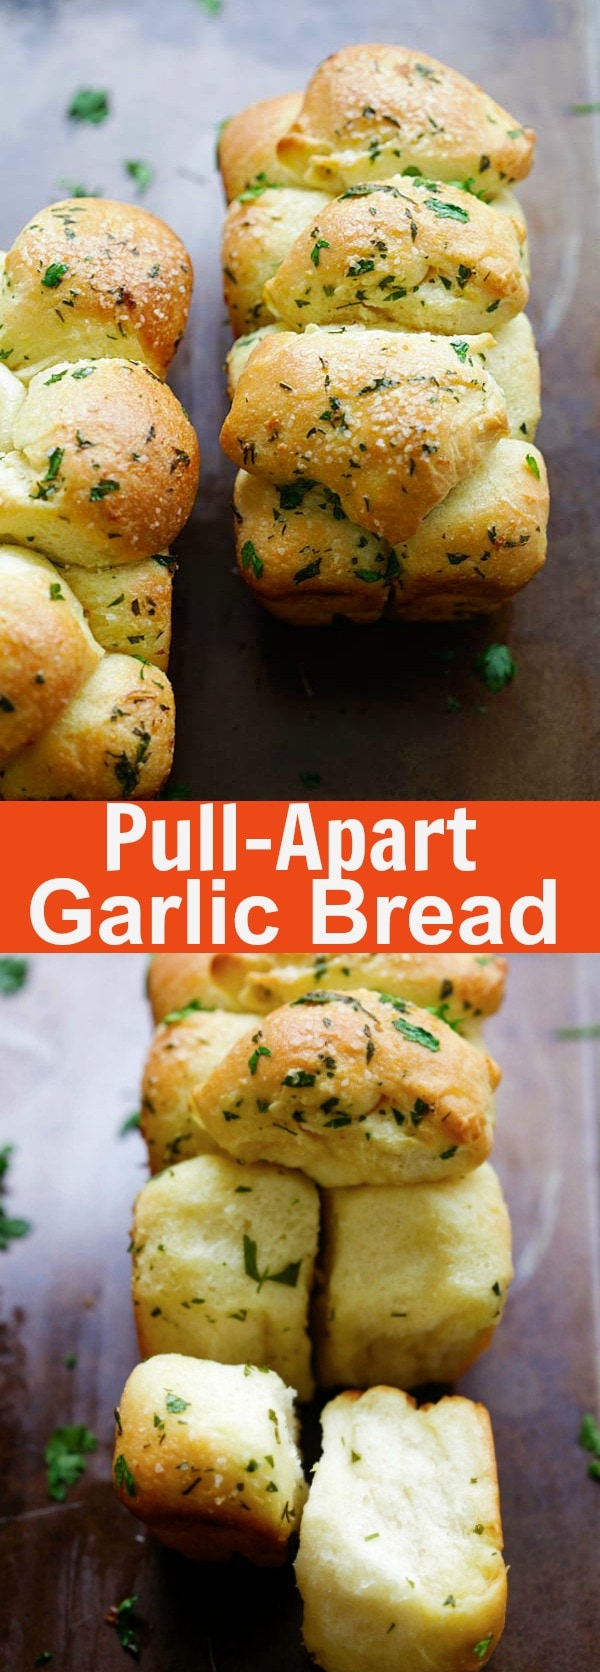 Pull Apart Garlic Bread - homemade pull apart garlic bread recipe that is easy, fool proof and yields the softest and best garlic bread ever | rasamalaysia.com